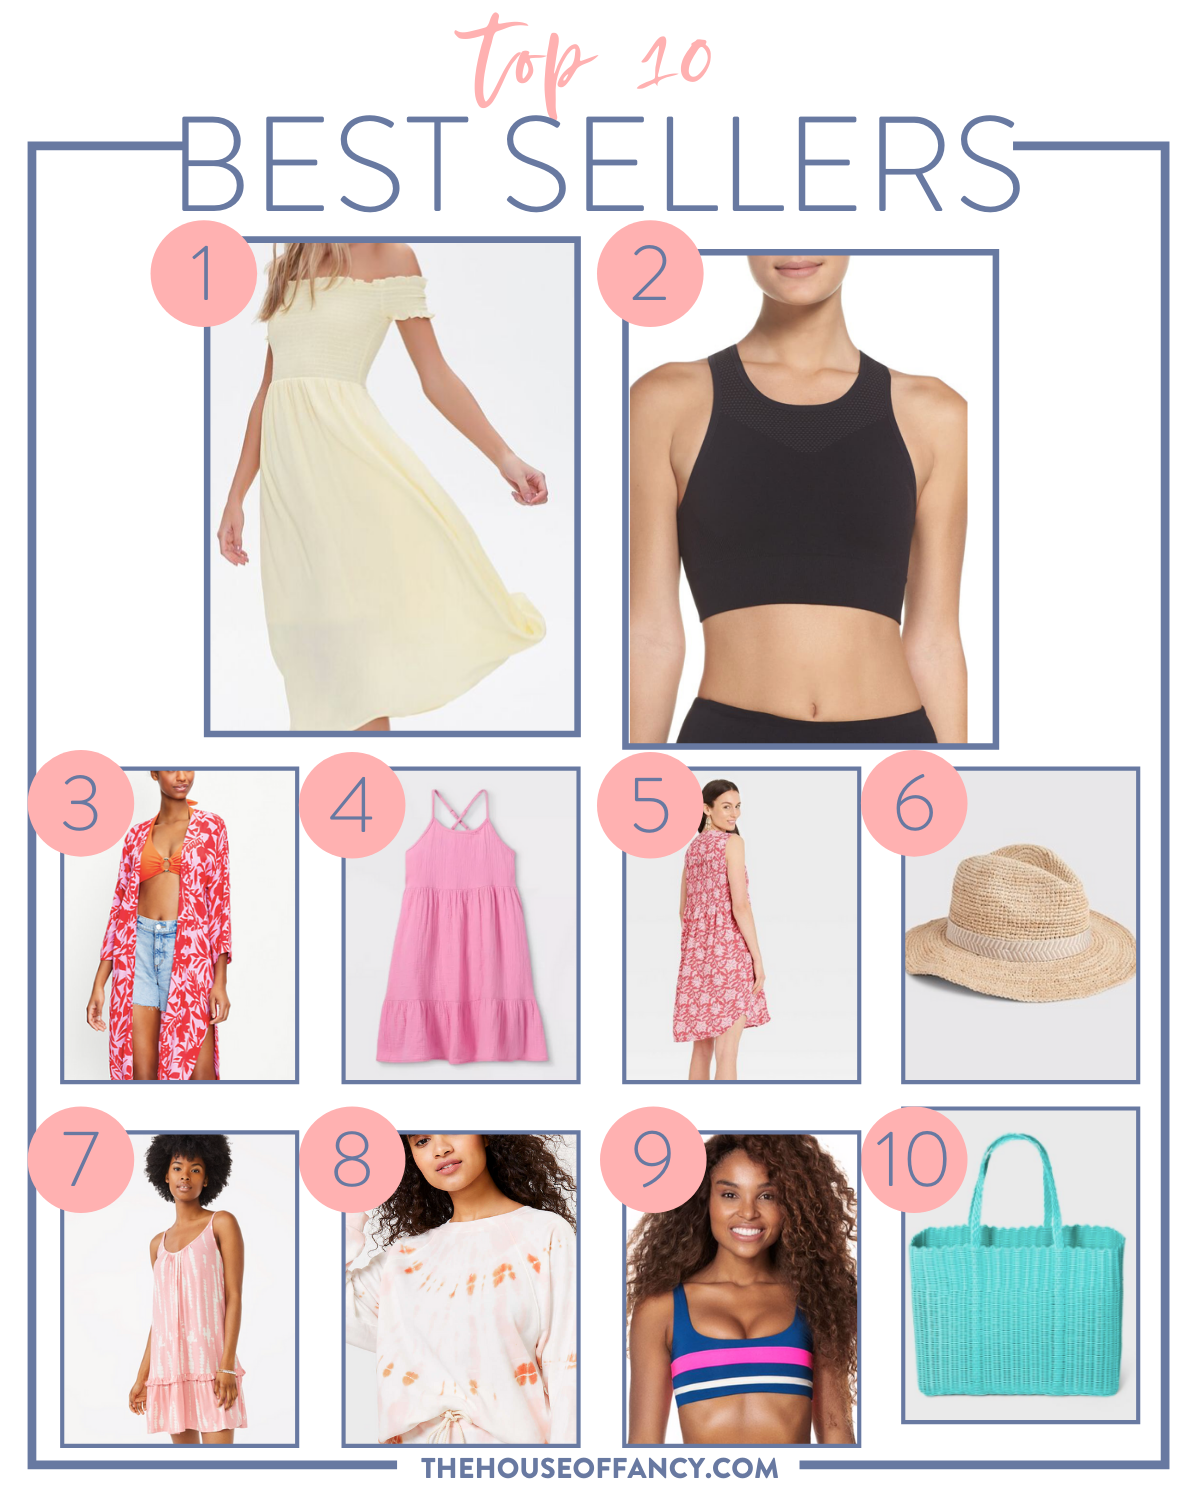 Best Sellers by popular Houston fashion blog, The House of Fancy: collage image of a a yellow smock off the shoulder midi dress, black sports bra, pink and whit floral kimono, pink tiered strap dress, straw fedora, pin and white print sleeveless dress, blue woven tote bag, orange, white and pink tie dye sweatshirt, and pink and white ruffle hem strap dress. 